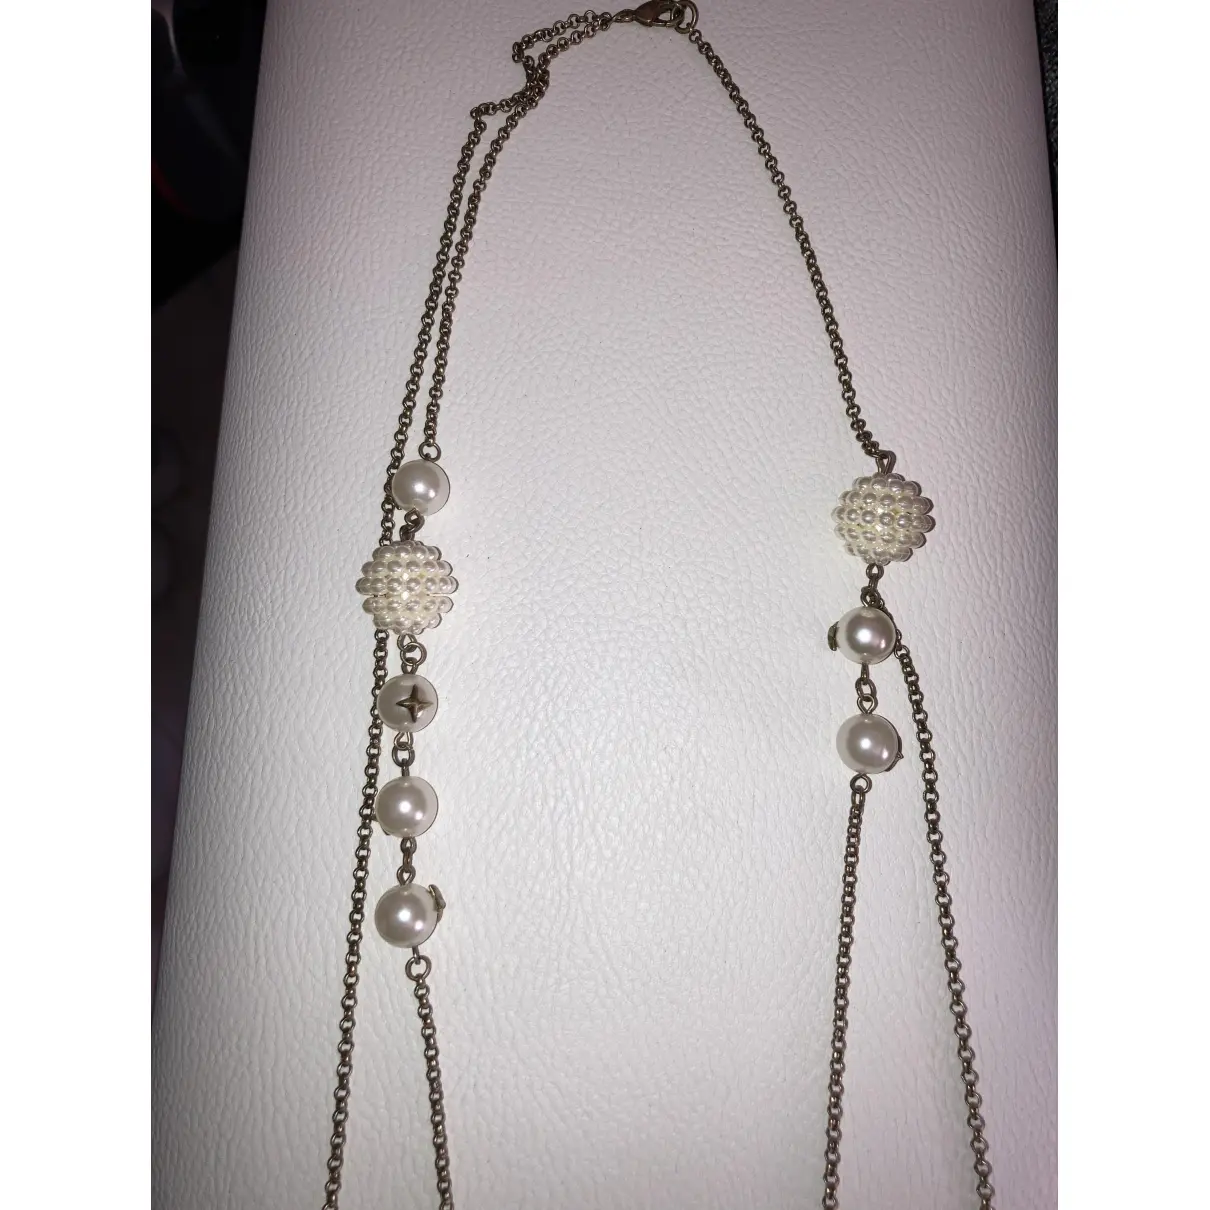 Buy Twinset Necklace online